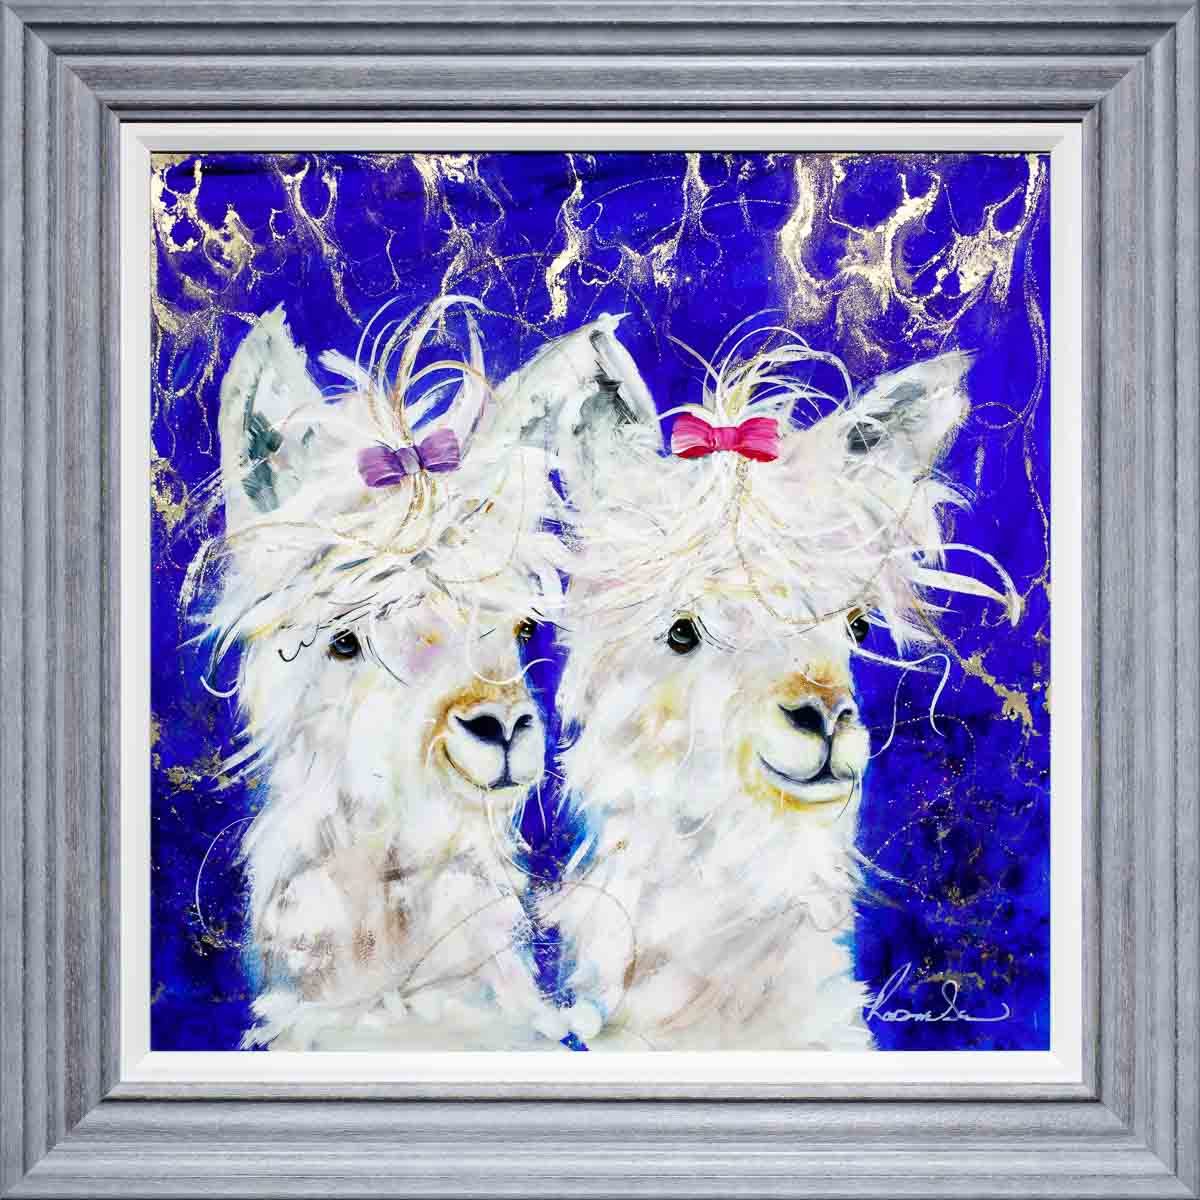 Lana and Lacey - Original Rozanne Bell Framed